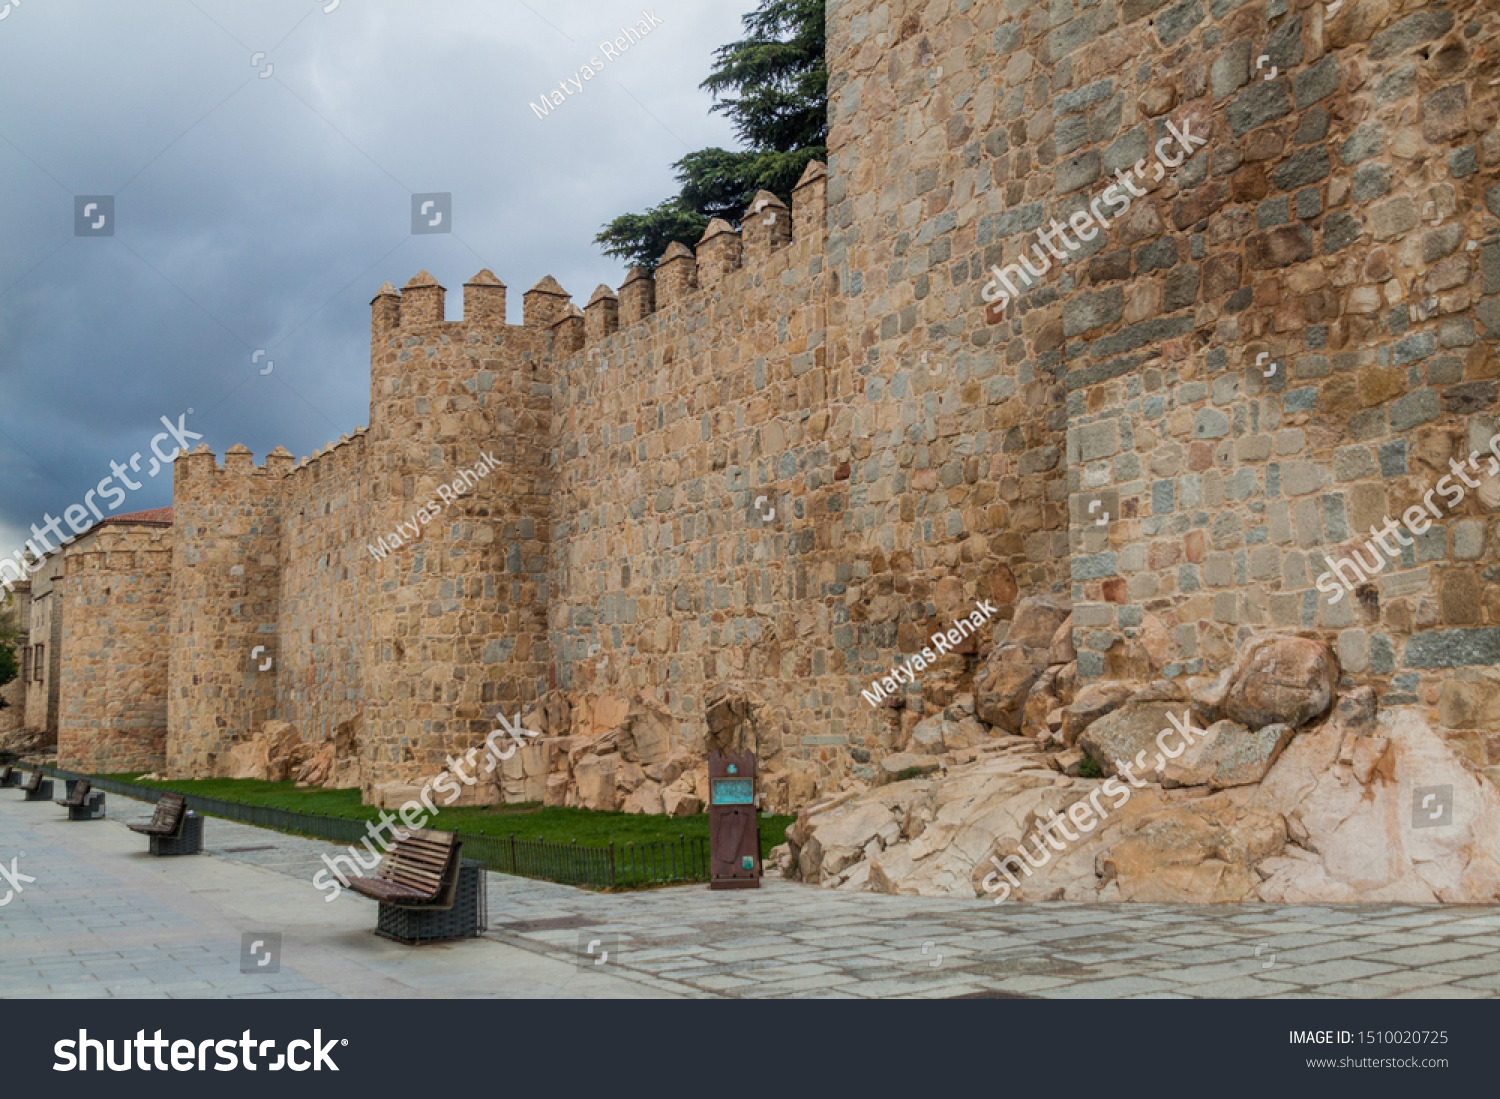 Fortification walls of the old town in Avila, Spain. #1510020725